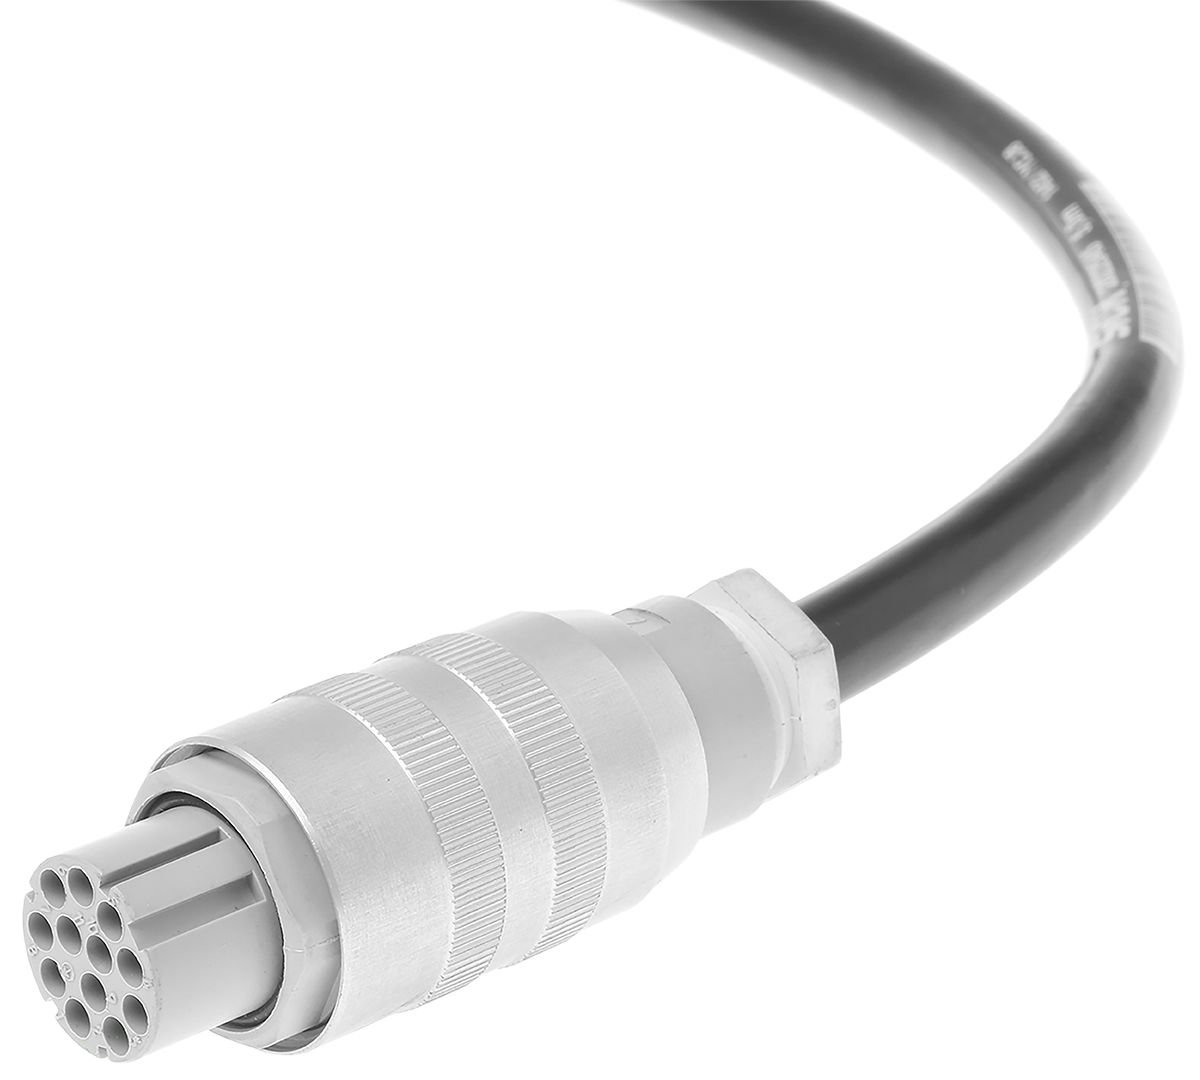 Sick Connection Cable for Use with C4000 Light Beams, M4000 Light Beams